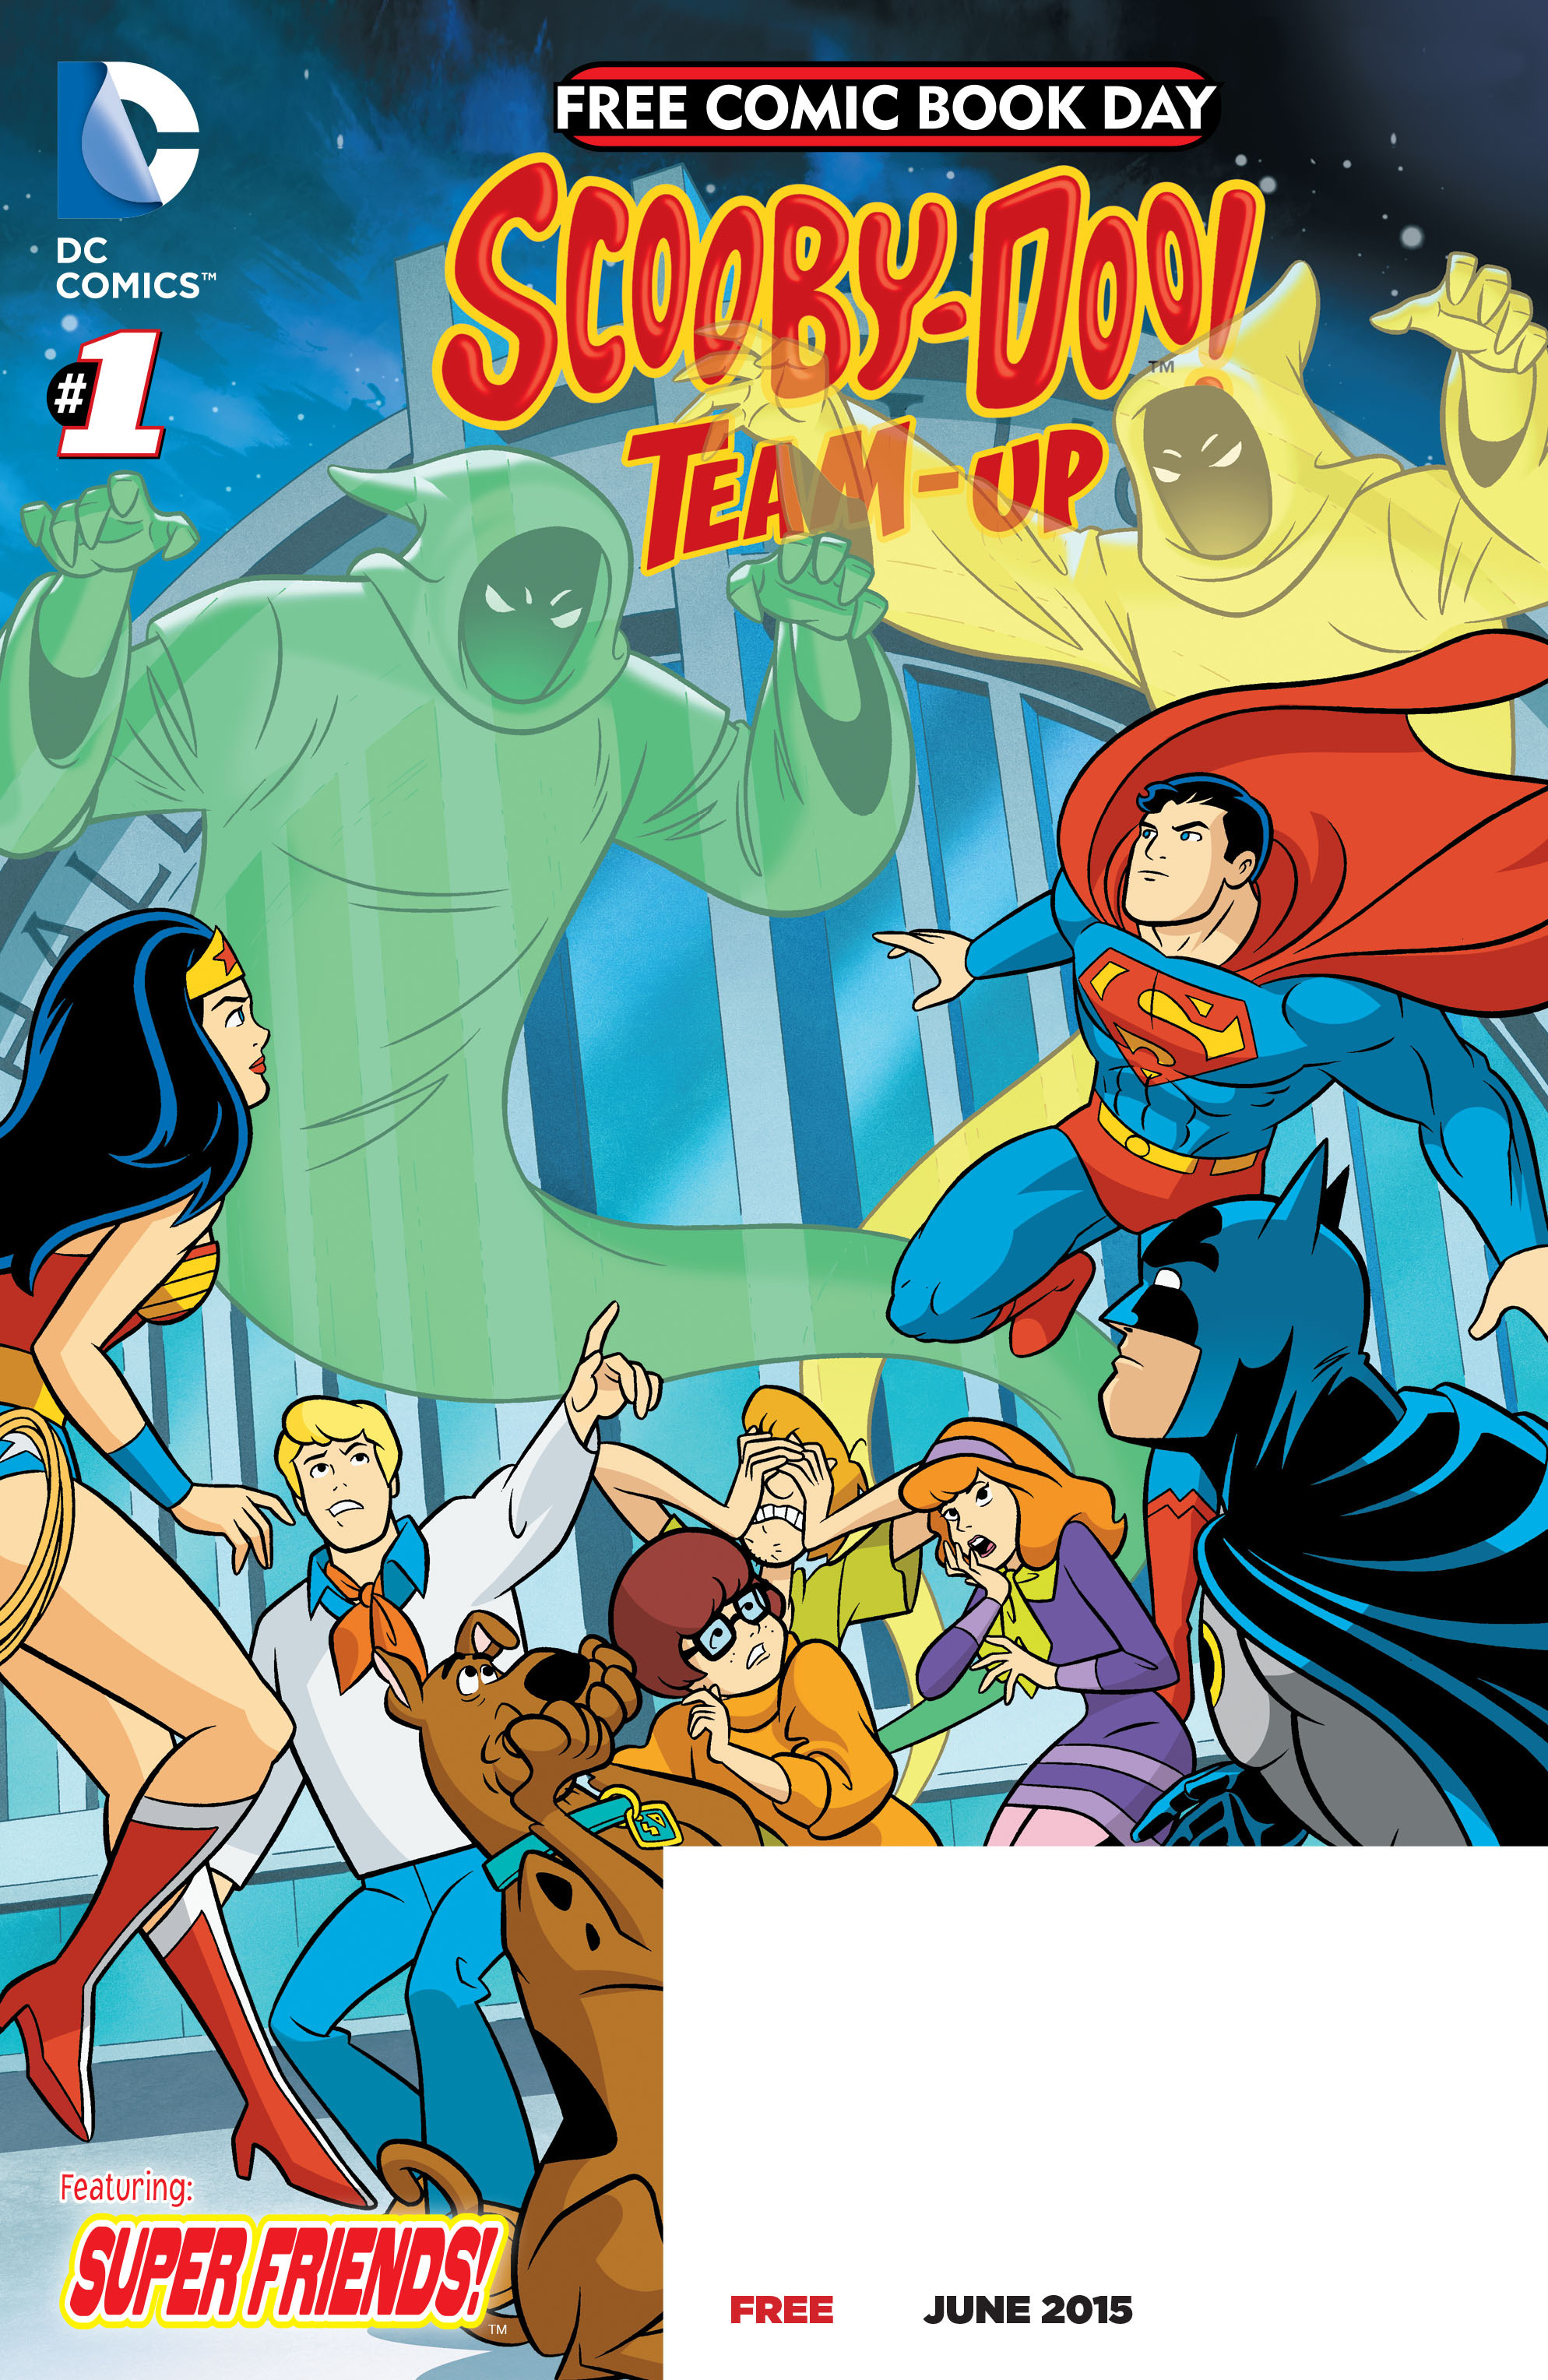 Read online Free Comic Book Day 2015 comic -  Issue # Teen Titans Go! - Scooby-Doo Team-Up - Special Edition - 2